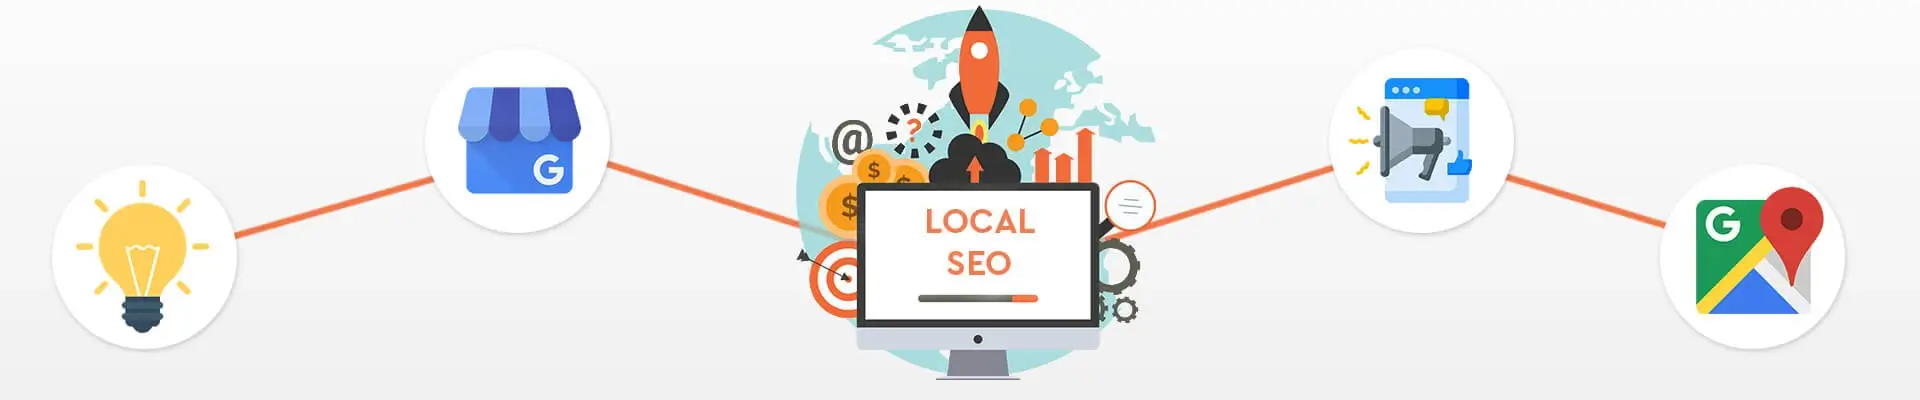 Why Local SEO Services is Important For Your Business (2020)